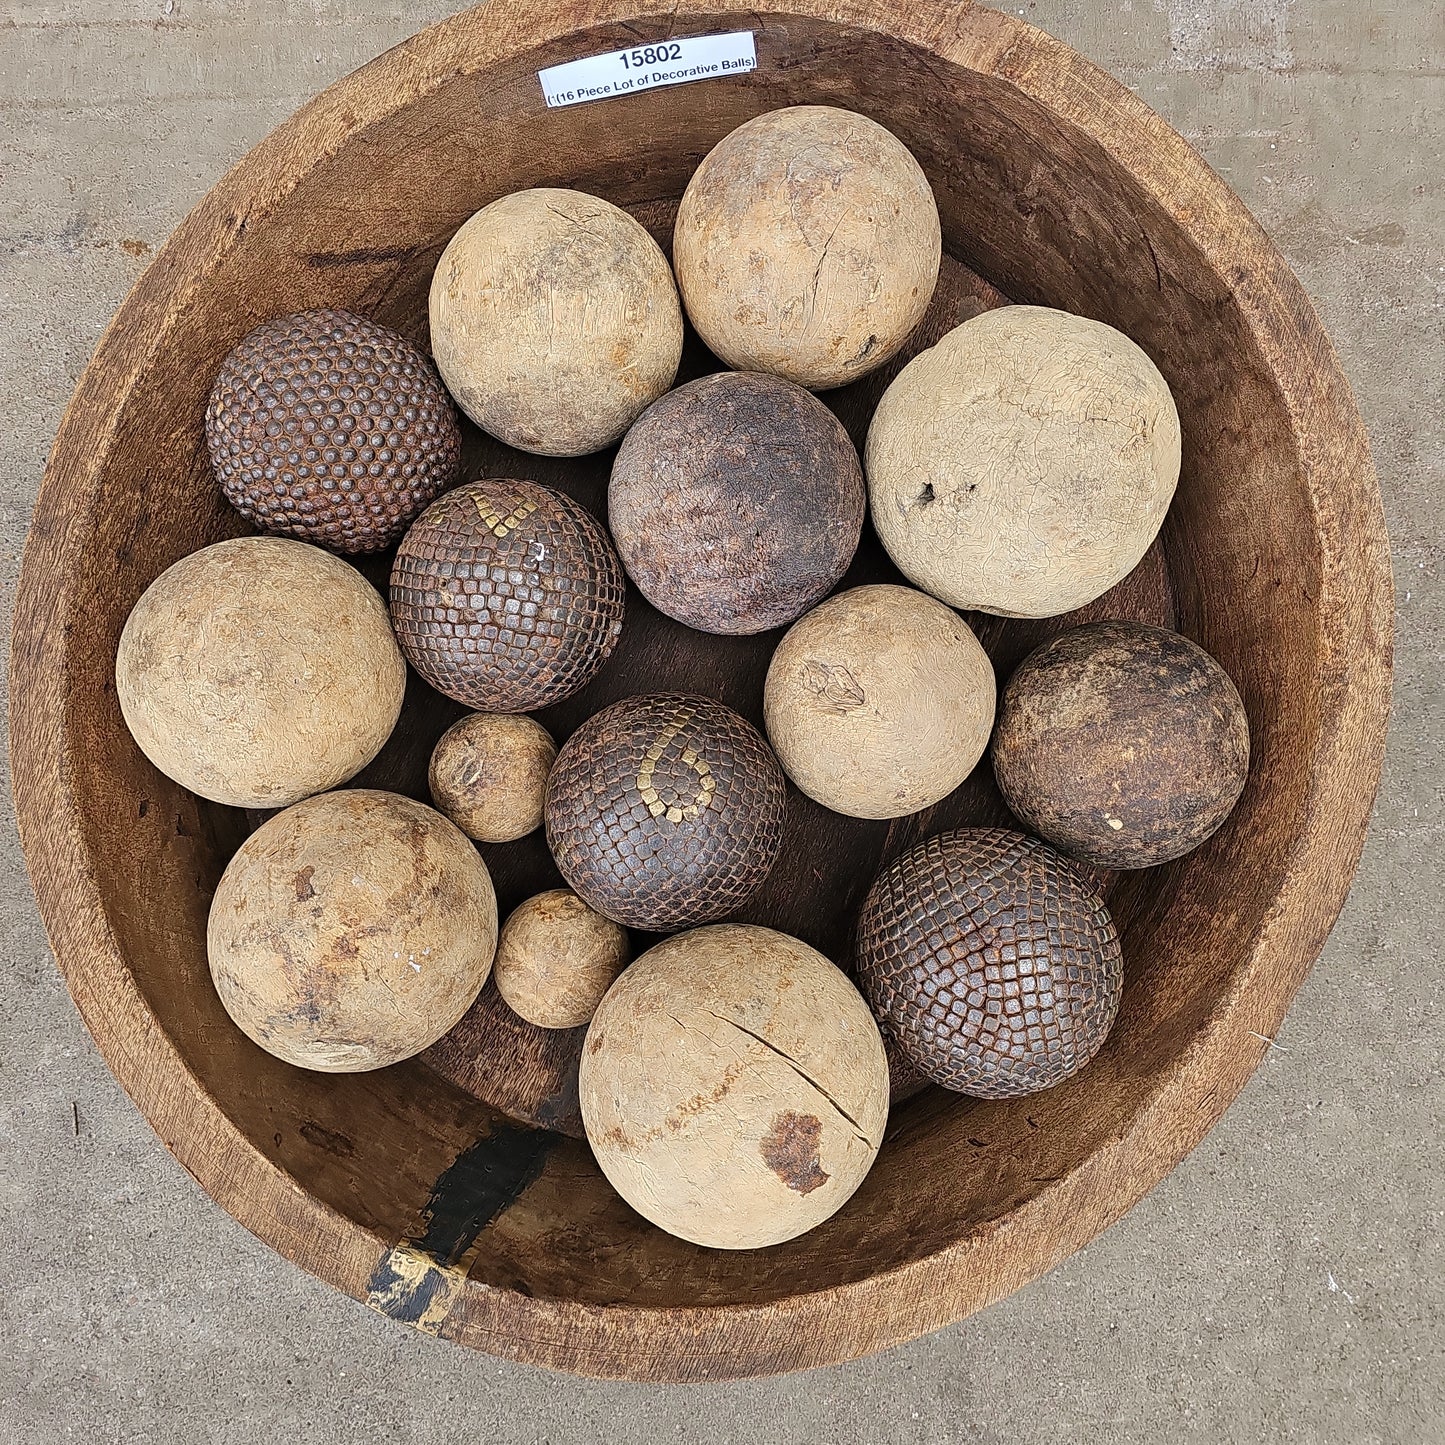 16 Piece Lot of Wood and Metal Decorative Balls